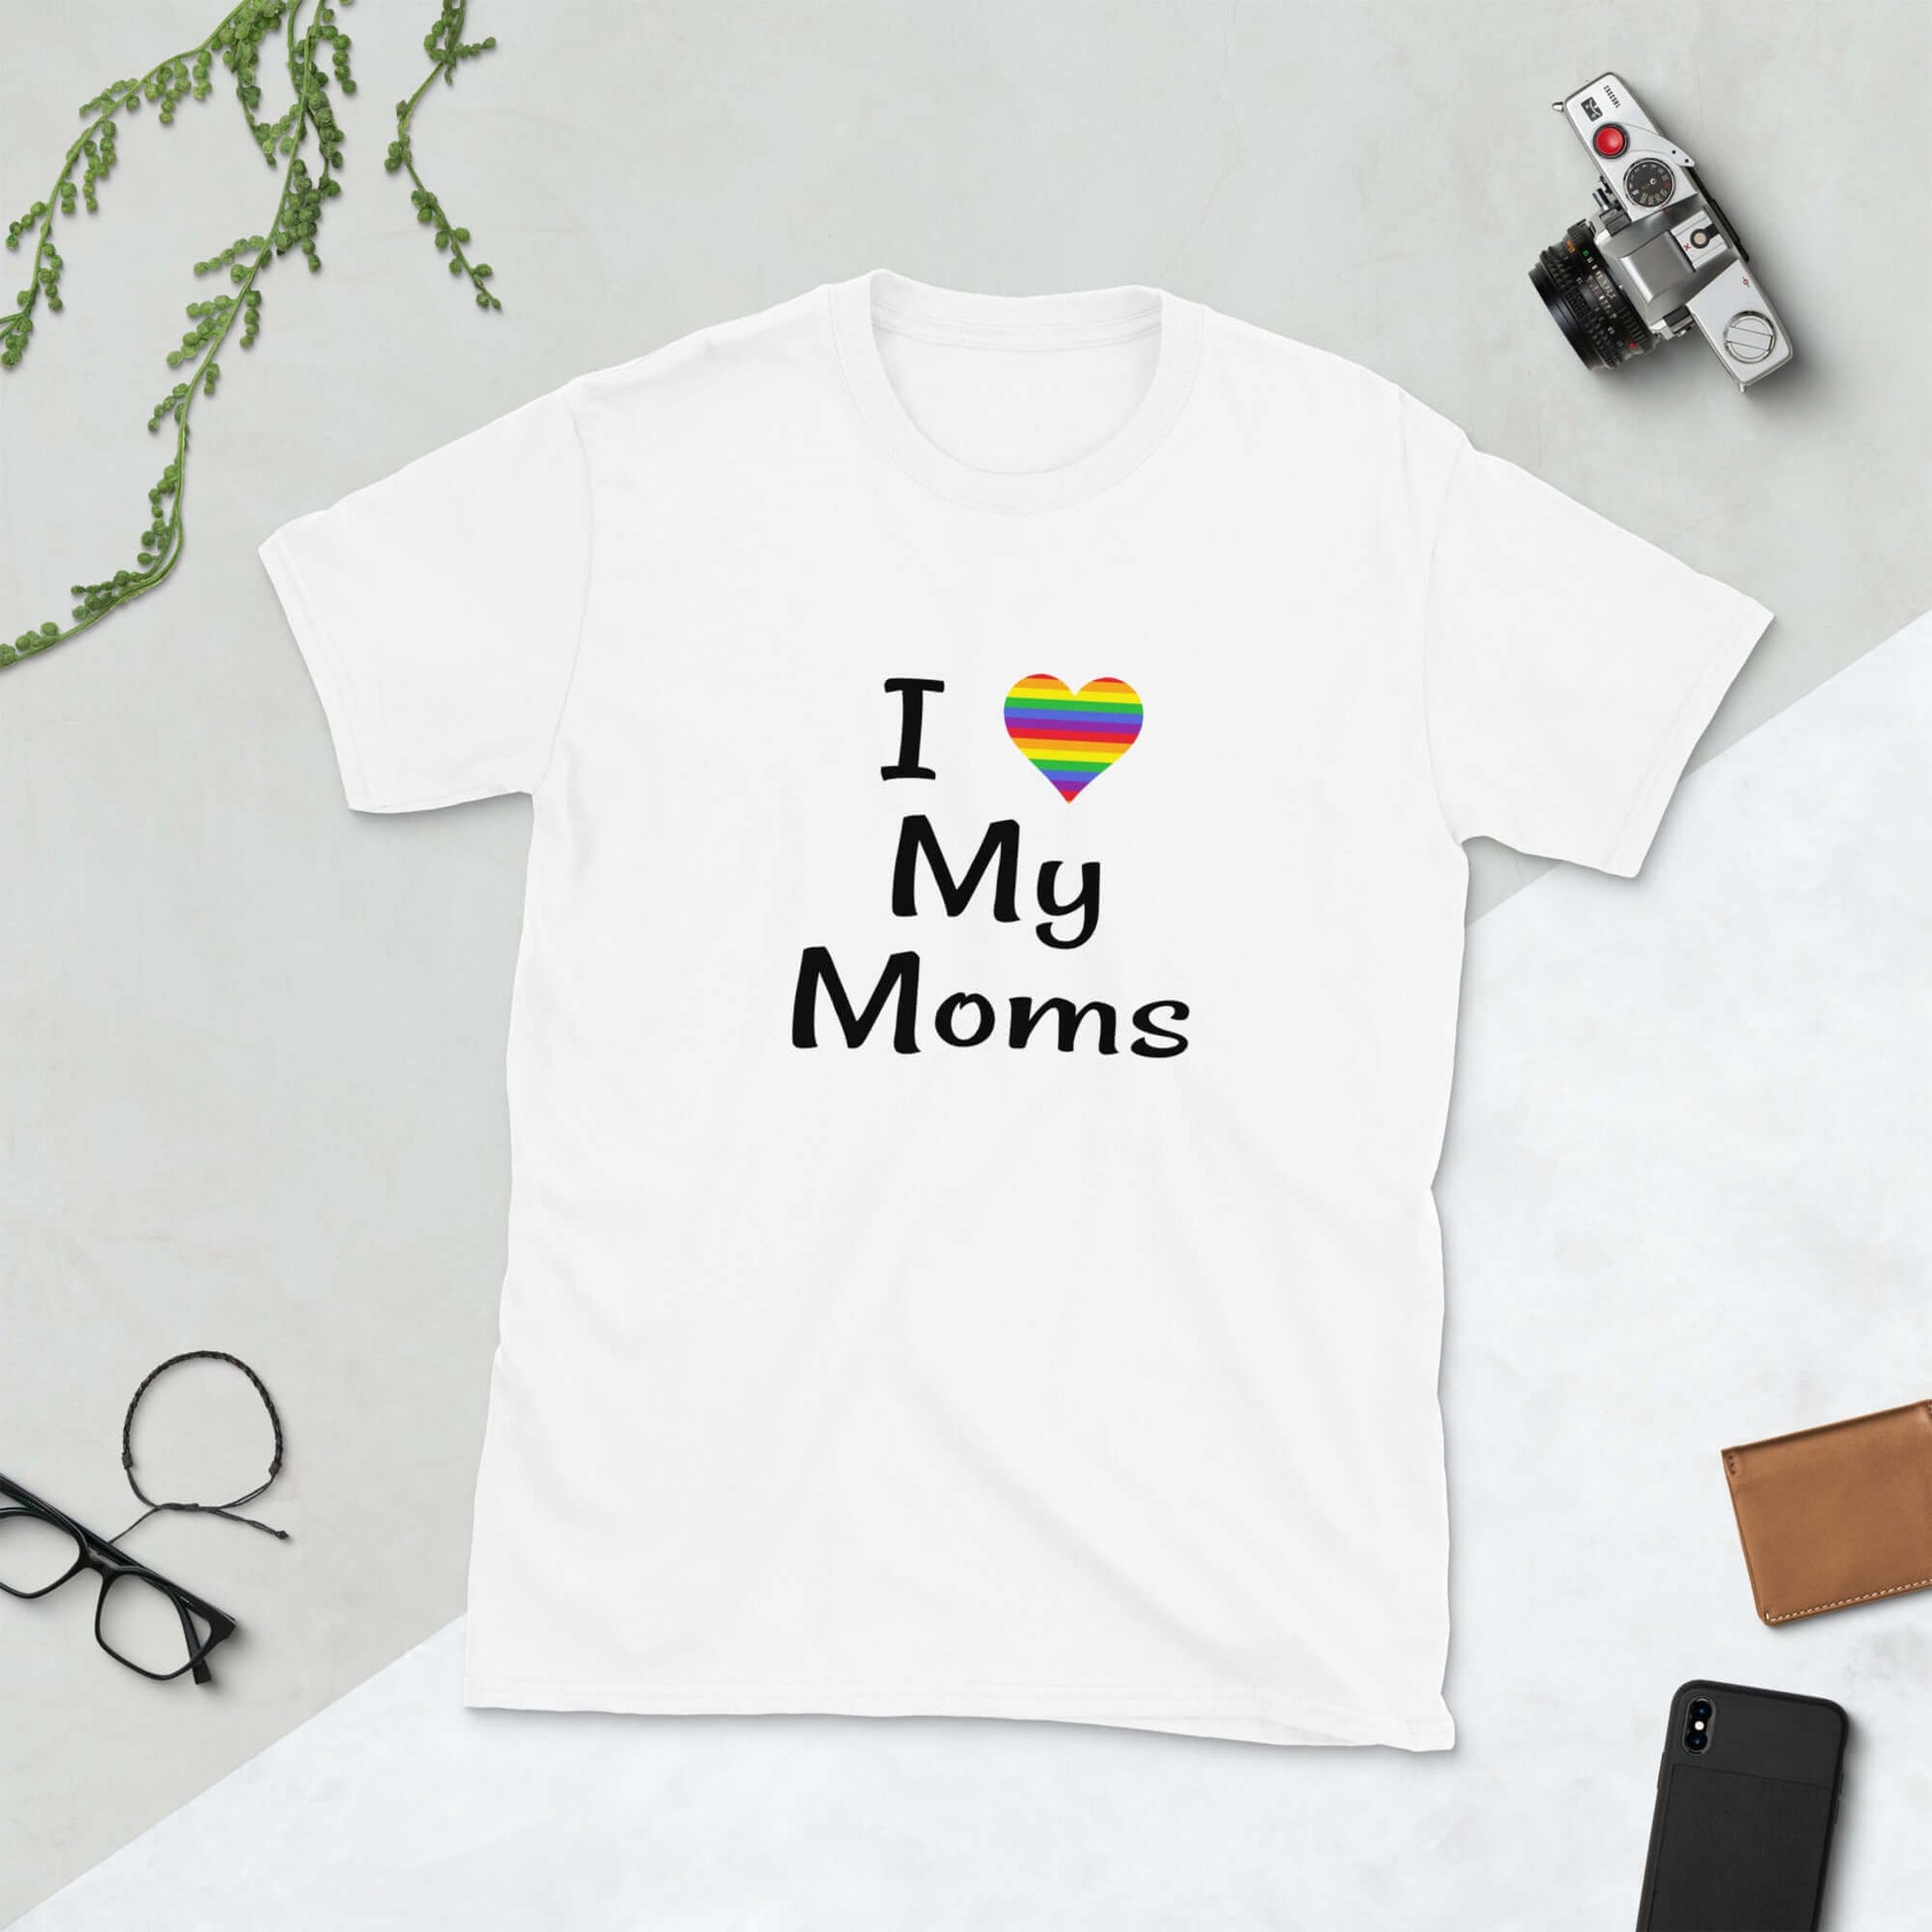 White t-shirt with I heart my moms printed on the front. The heart is rainbow colors.